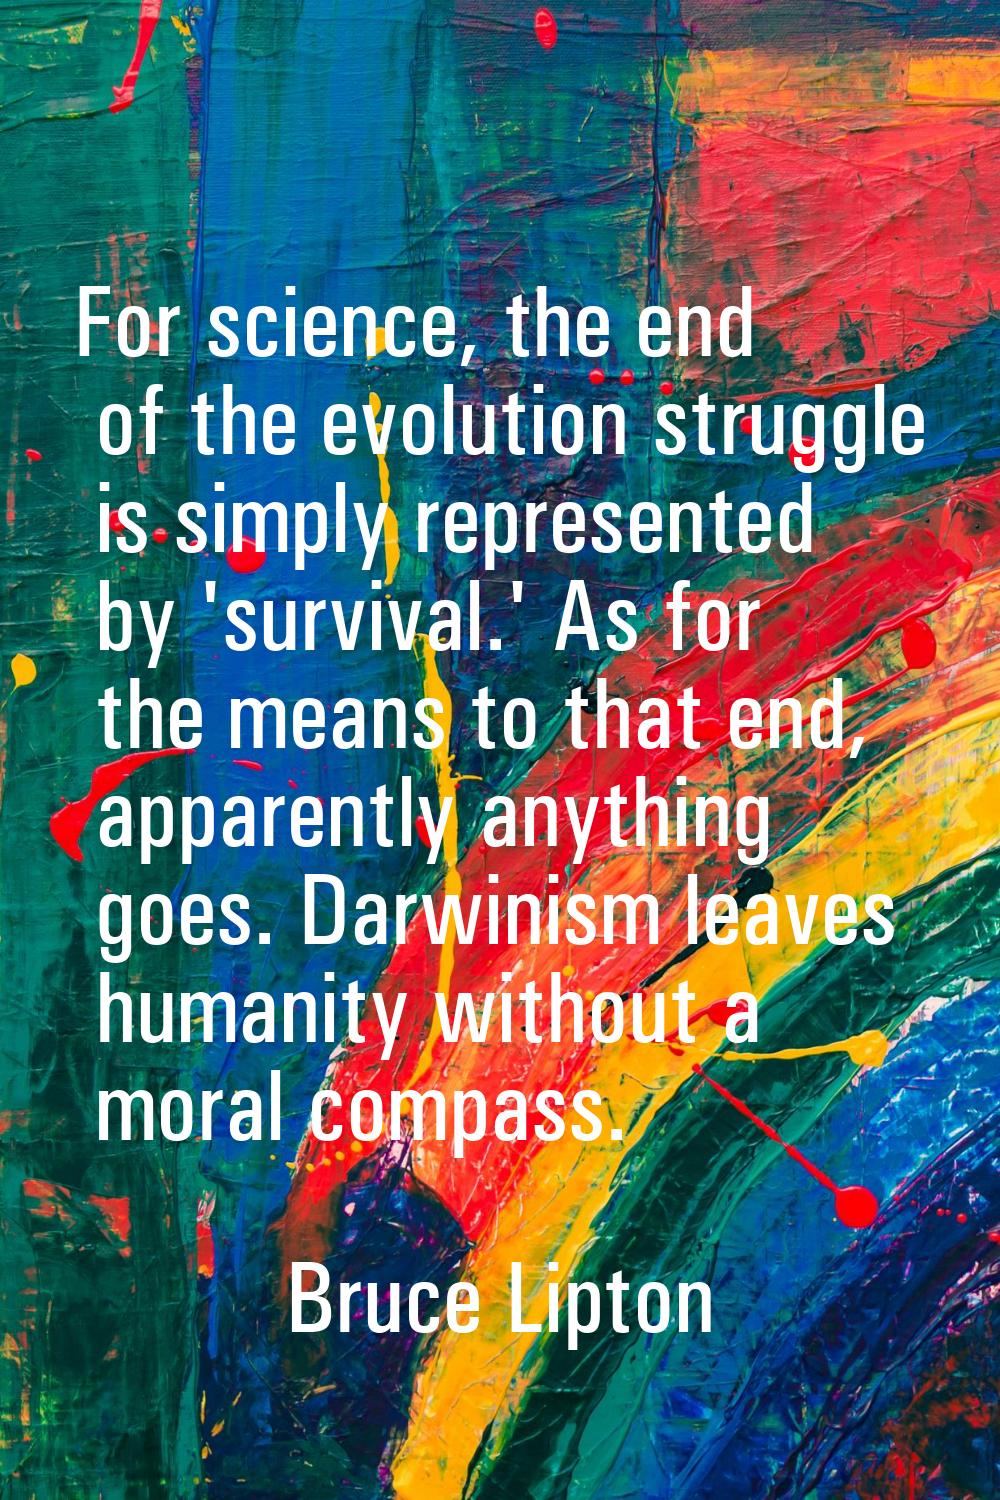 For science, the end of the evolution struggle is simply represented by 'survival.' As for the mean